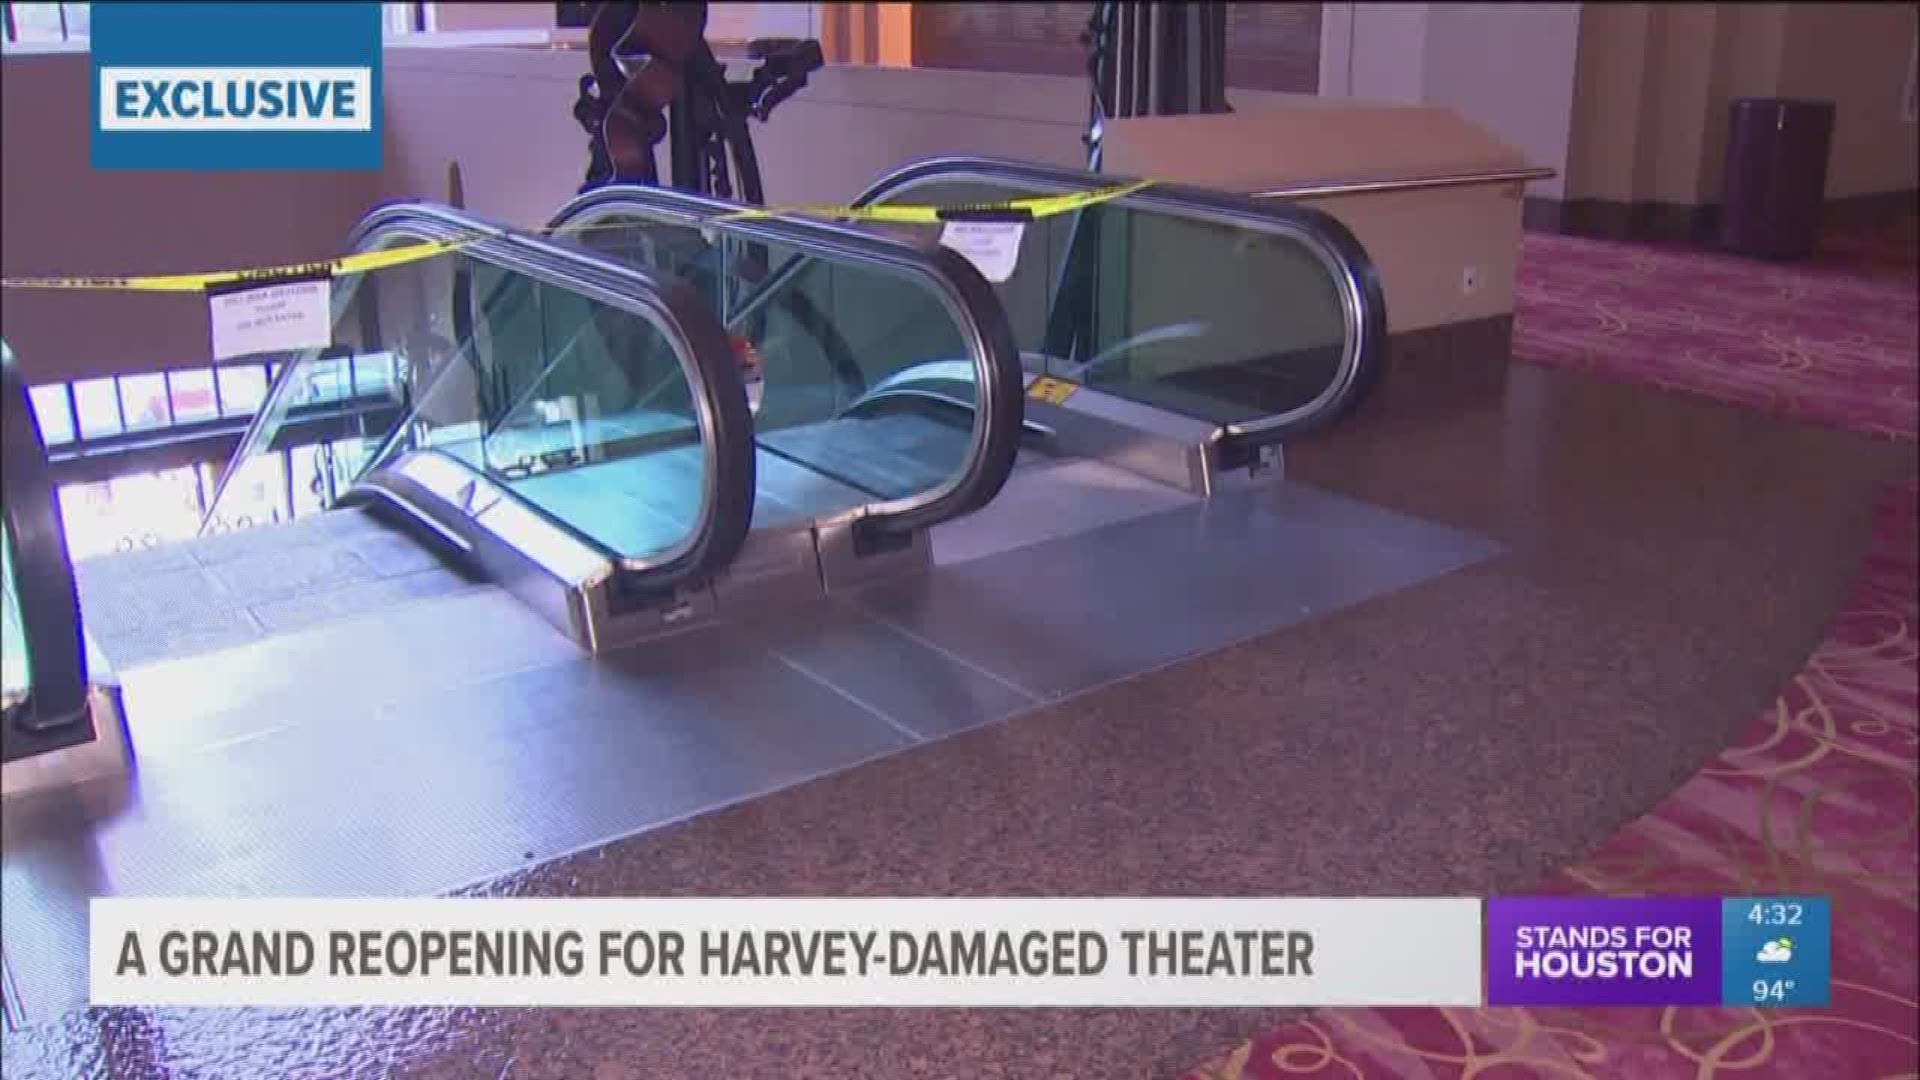 This weekend, the Wortham Theater Center will welcome patrons for the first time since Hurricane Harvey hit Houston one year ago.